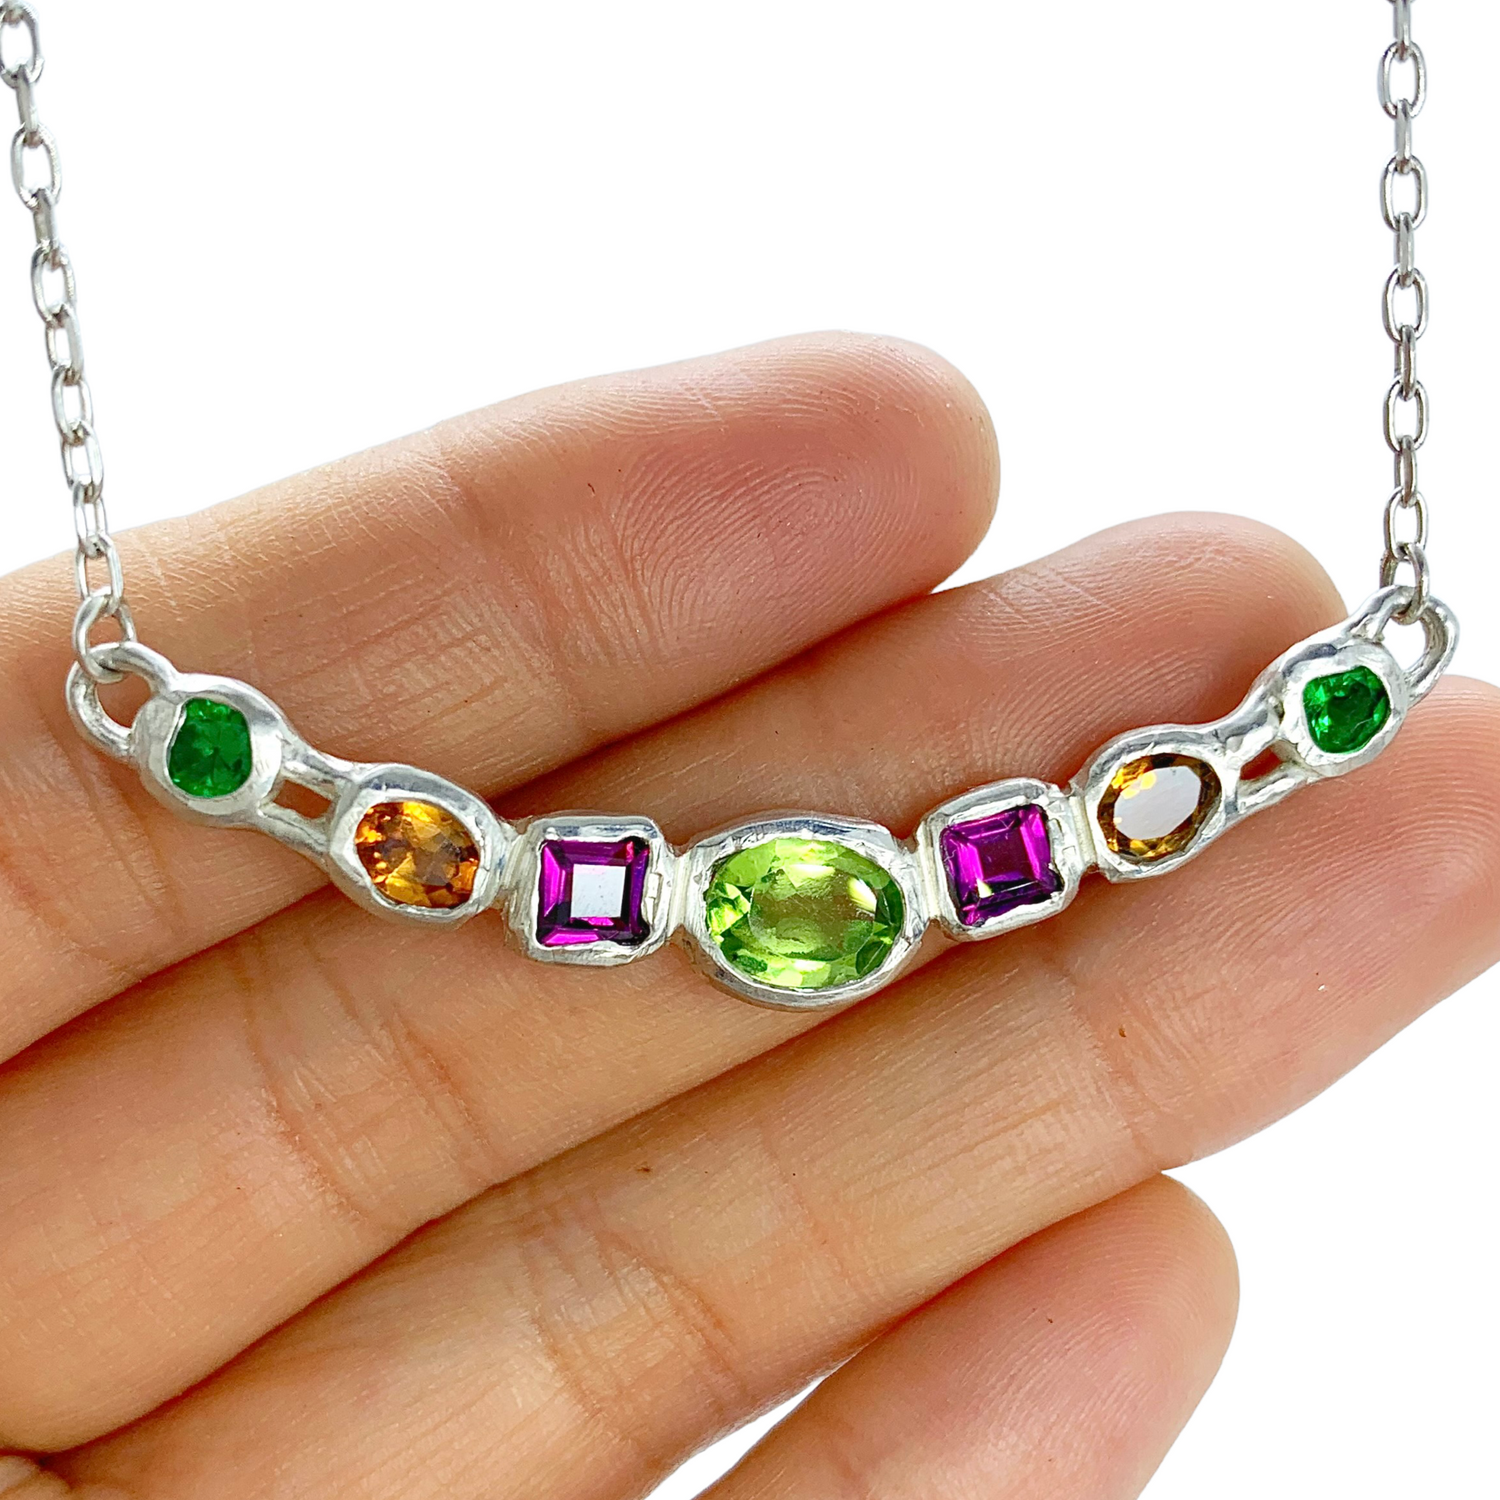 Warna-Warni Necklace comes with several colours. The main middle stone is Green Peridot. The rest of the stone are purple tourmalines, yellow tourmalines, and synthetic stones for the green. Warna-warni pendant is for everyday wear. 